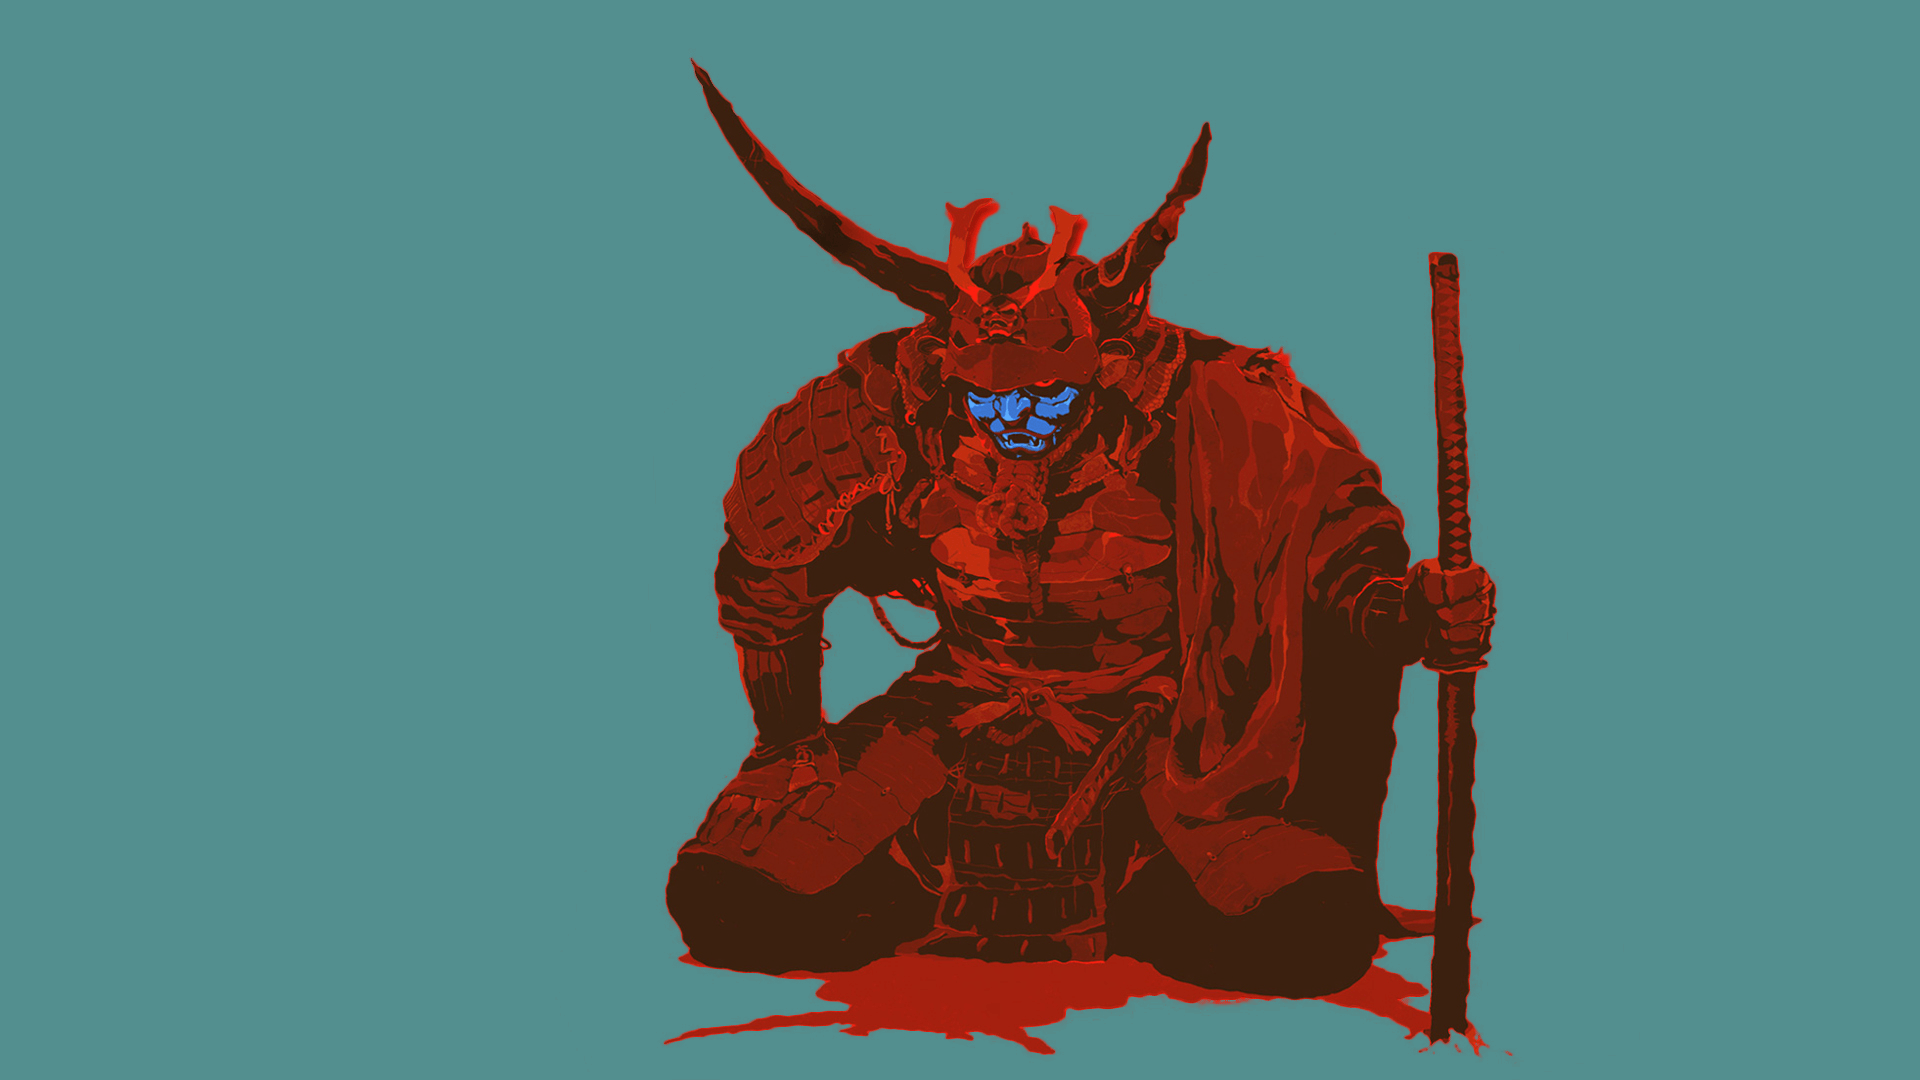 Red samurai with a blue face and a red sword - Samurai